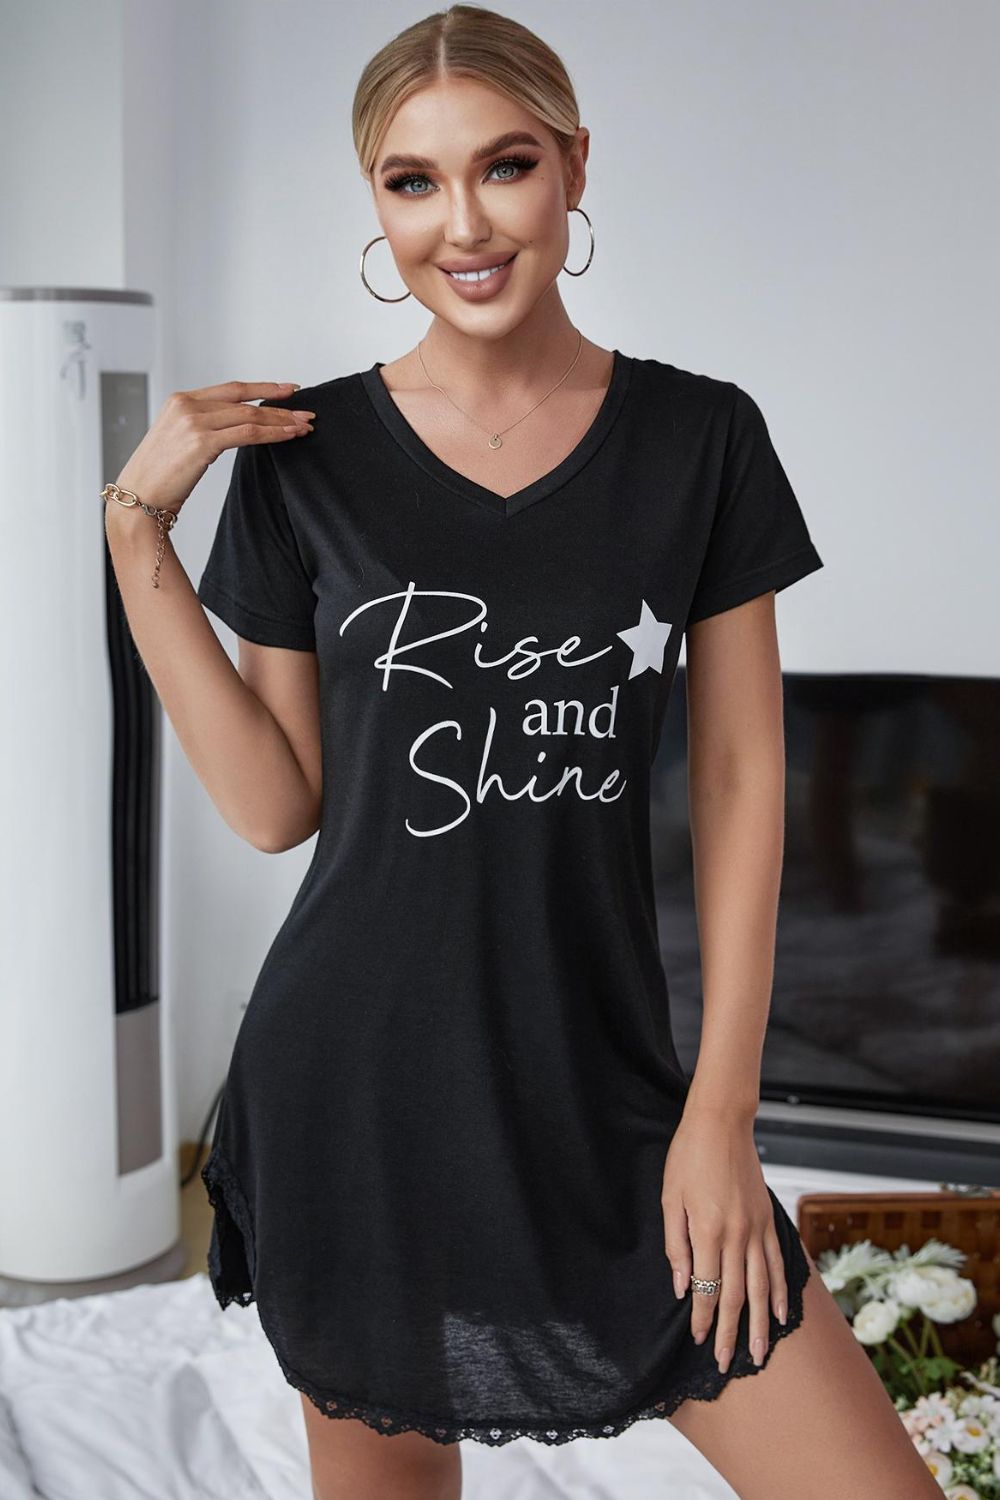 LADIES--Lounge in Style, Fun T-Shirt Dress--"RISE AND SHINE", Contrast Lace V-Neck T-Shirt Dress